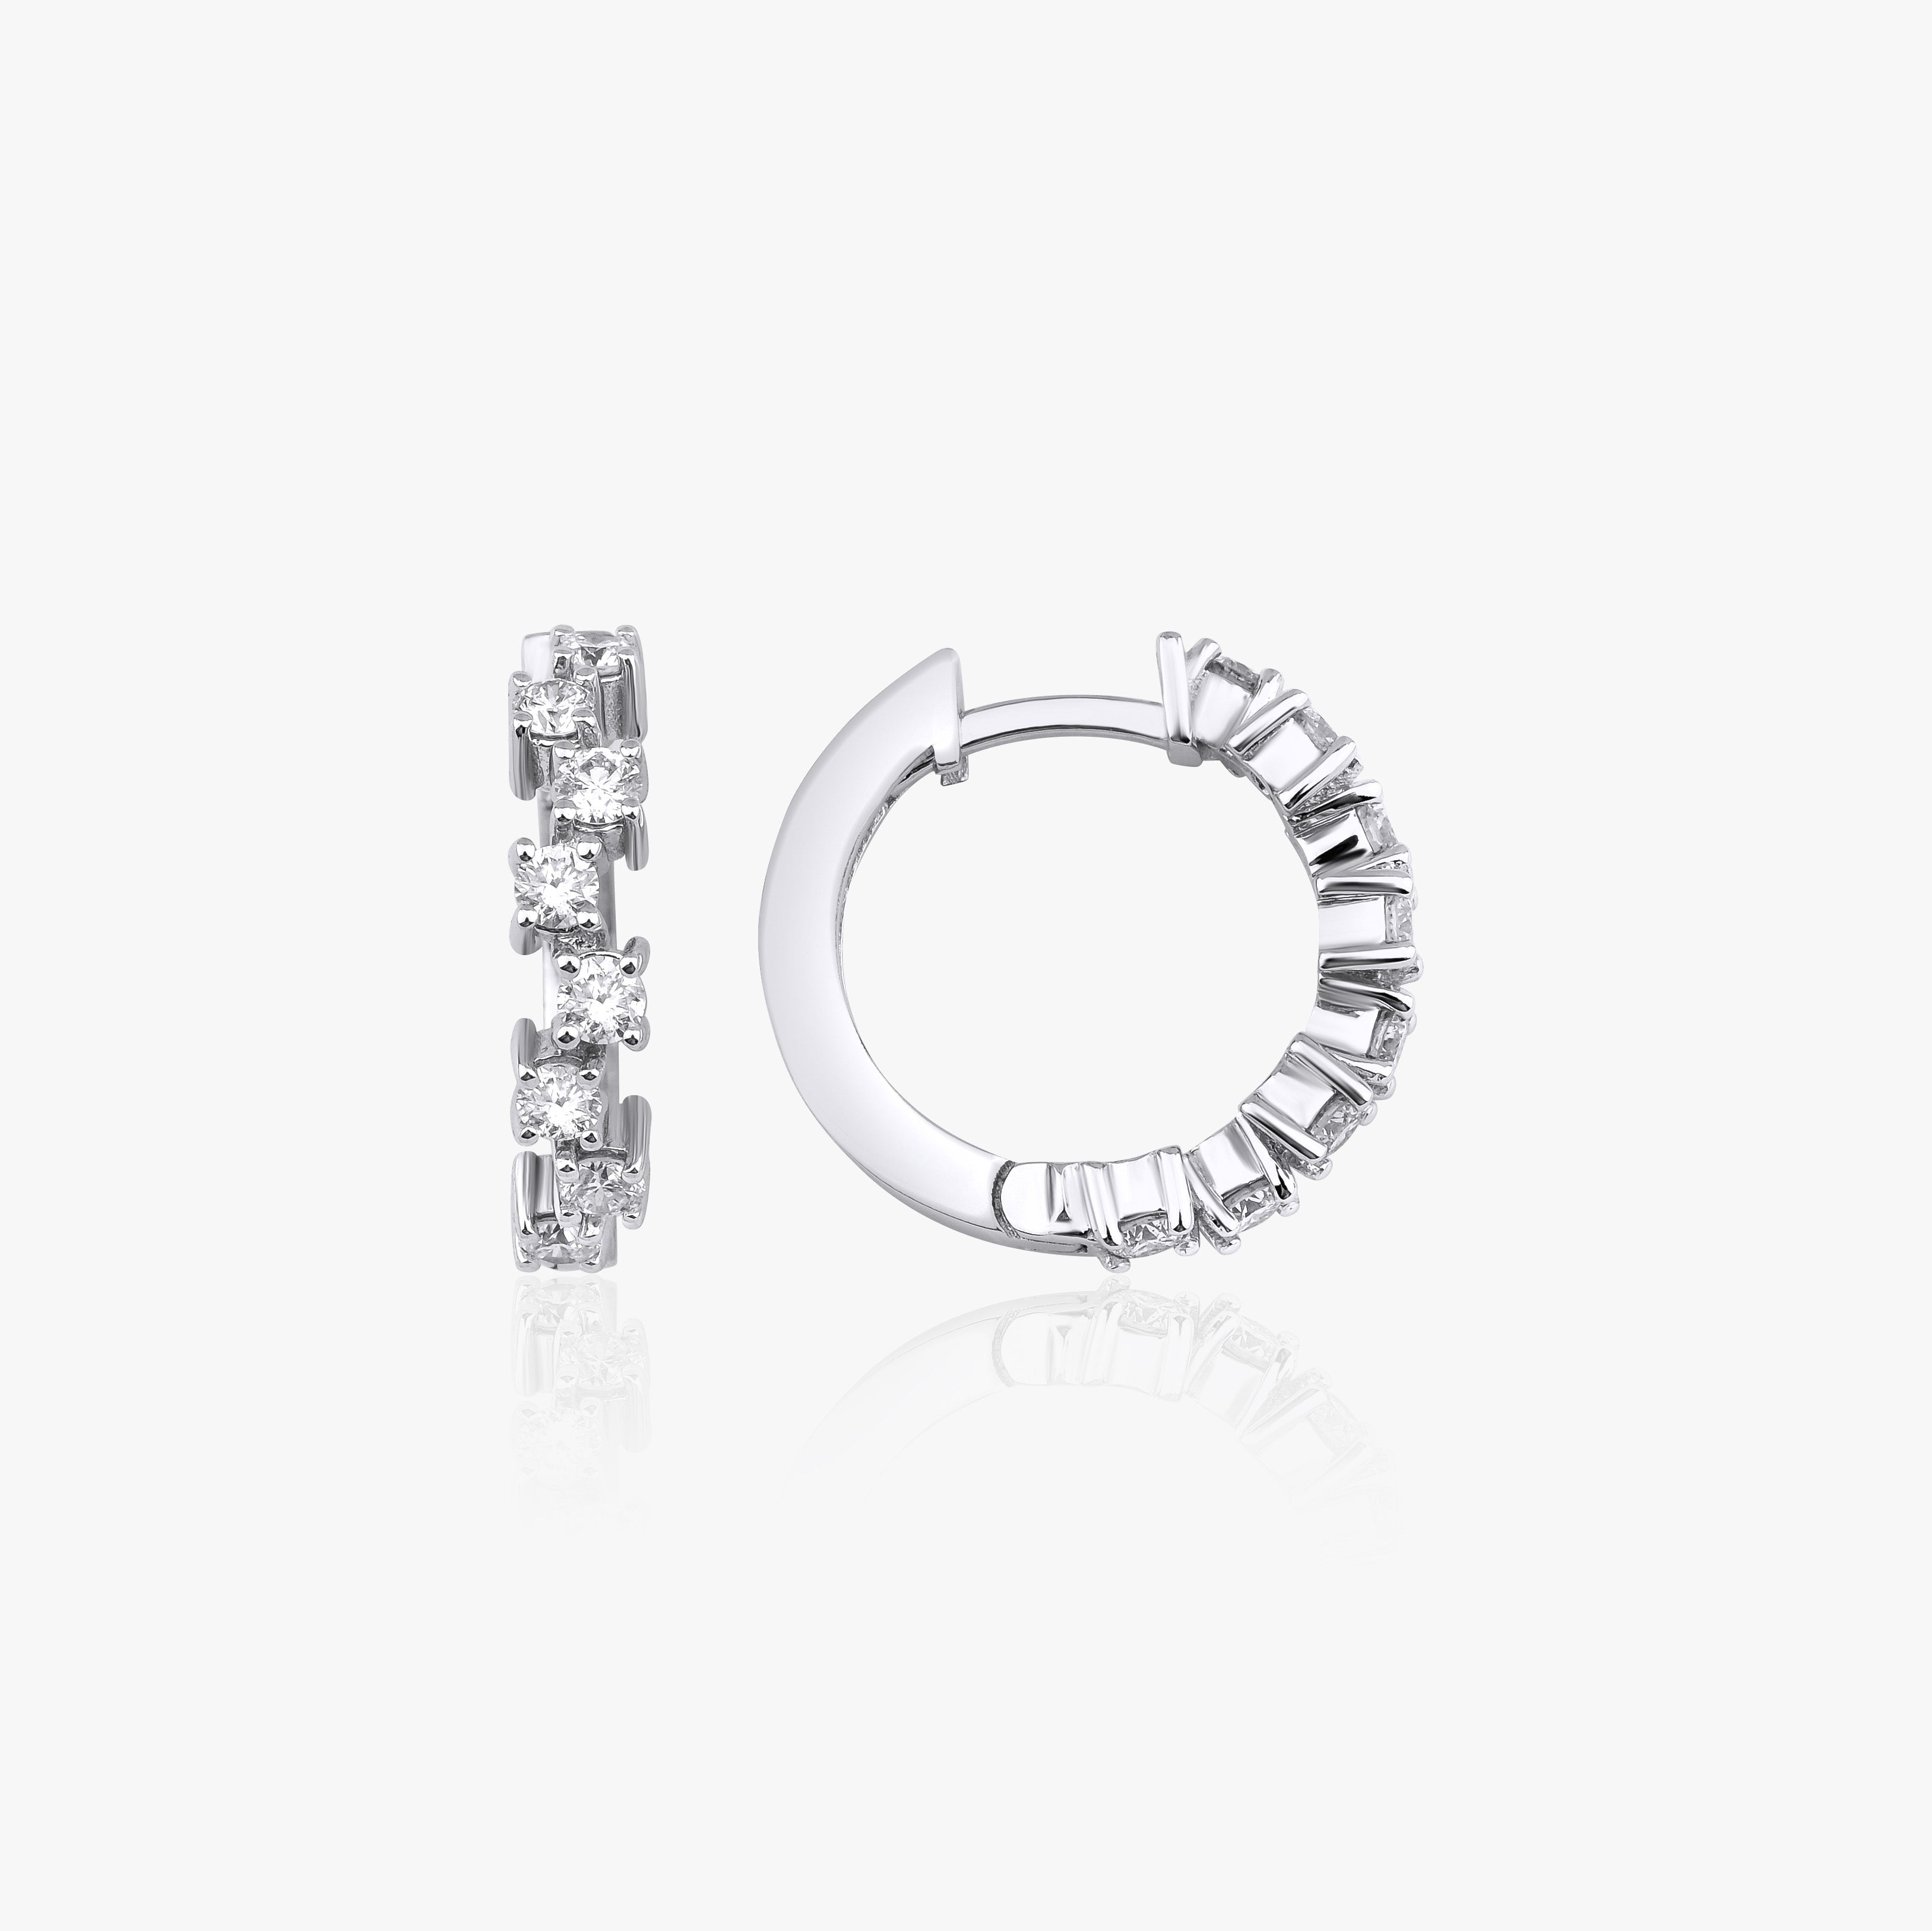 Diamond Hoop Earrings Available in 14K and 18K Gold